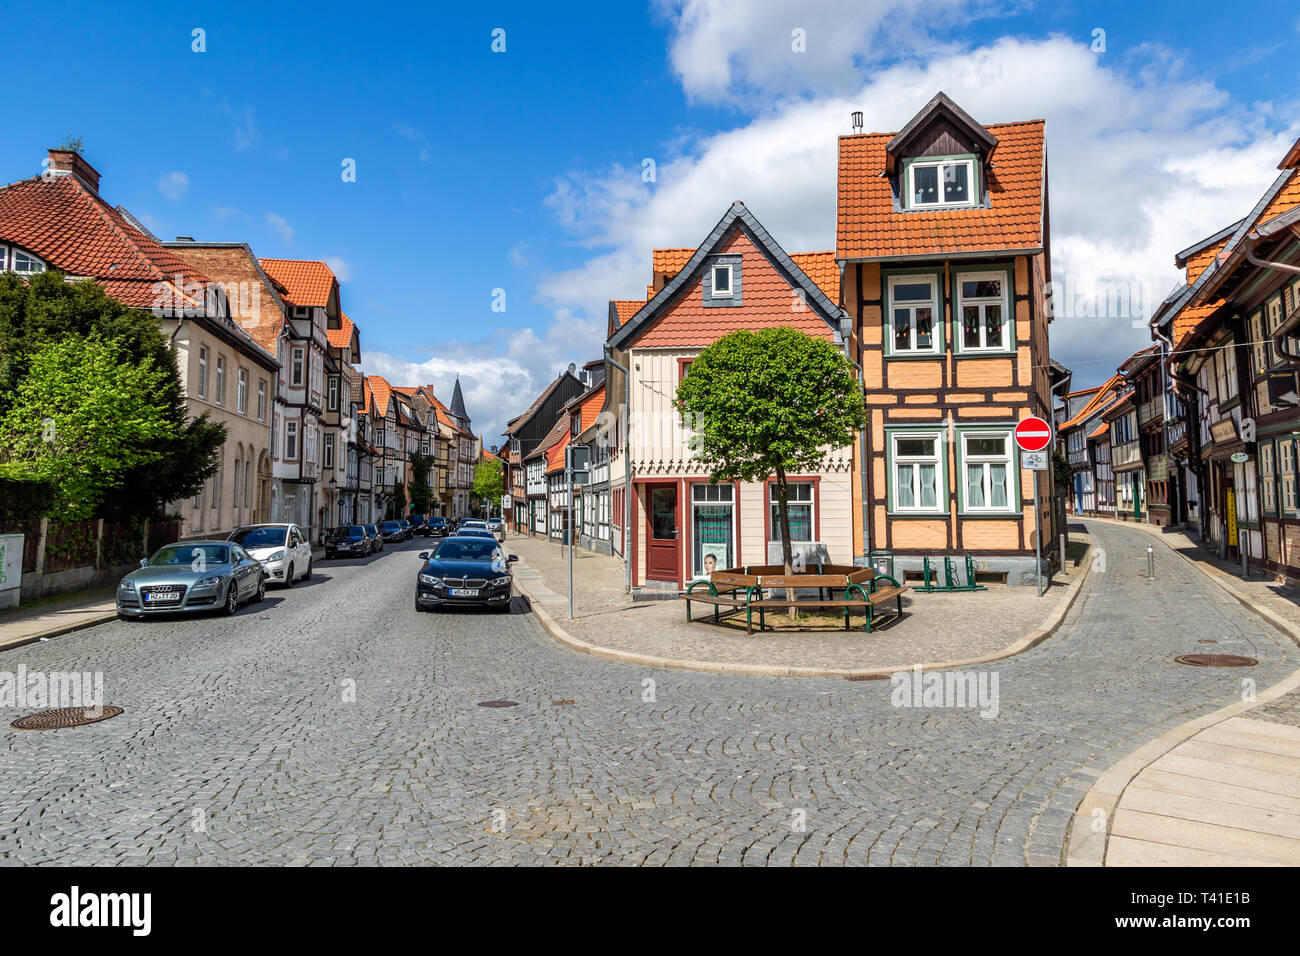 WERNIGRODE, GERMANY - APR 26, 2018: Historic timber framed houses in the centre of Wernigerode town in Saxony-Anhalt, Germany Stock Photo